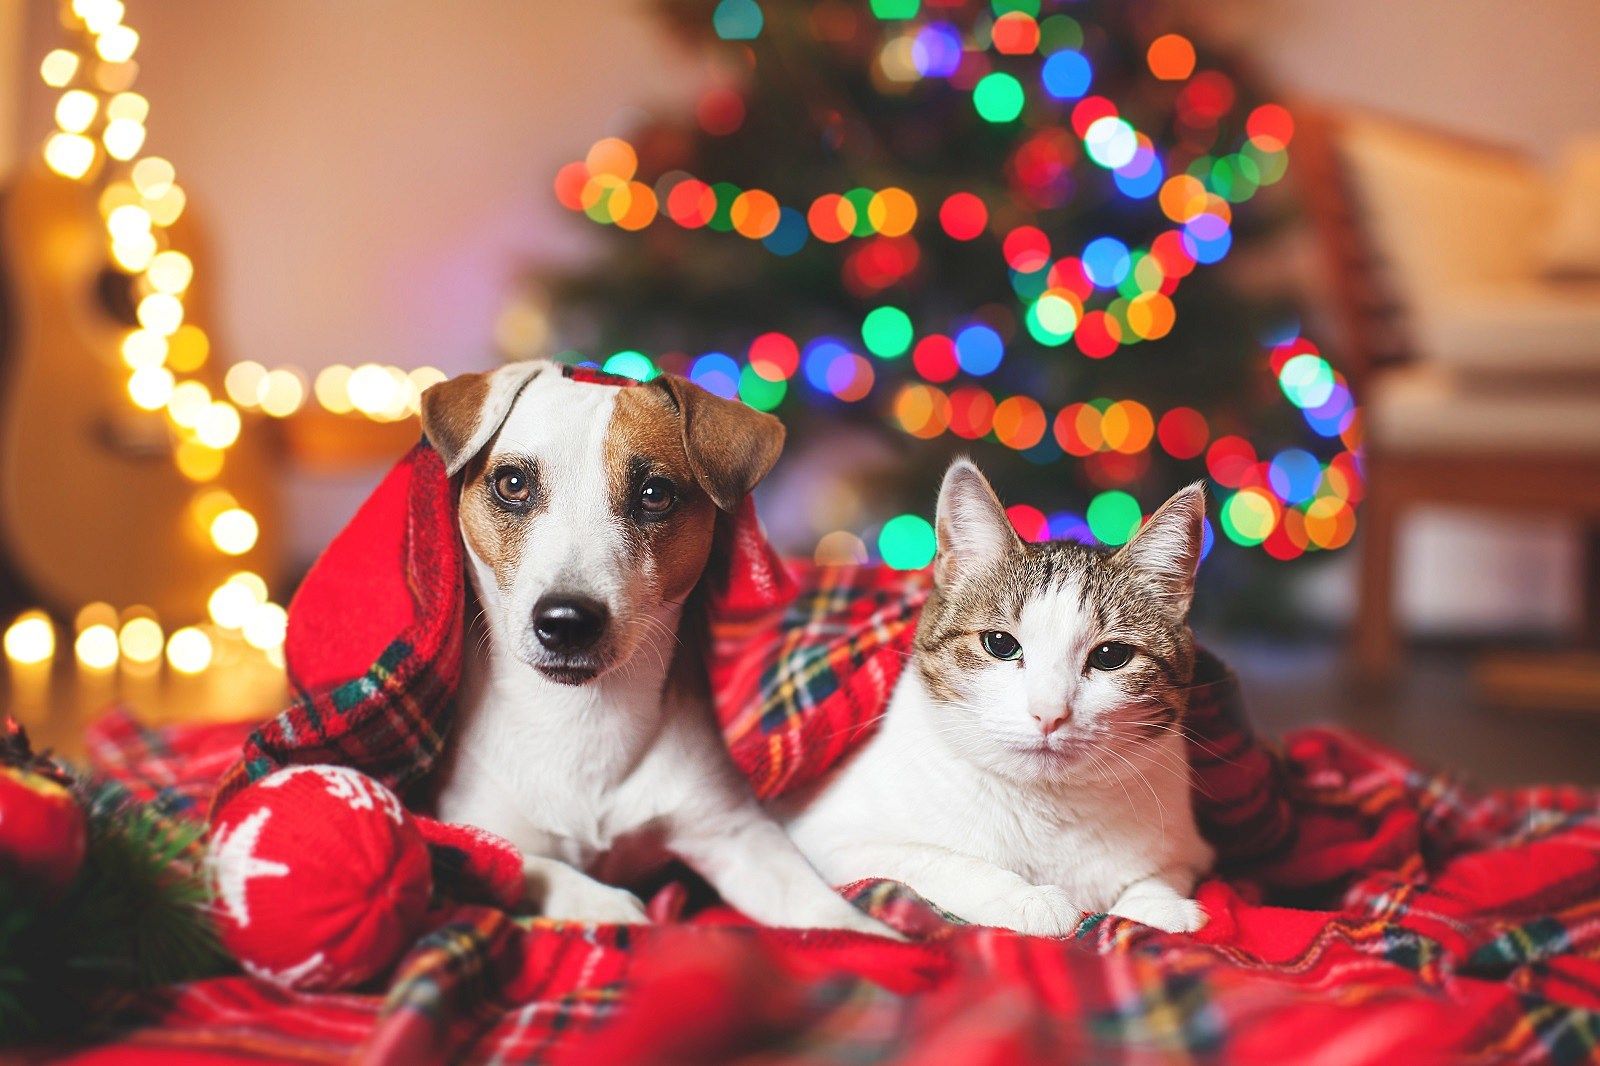 What is naughty, and what is nice for your pet this holiday season?